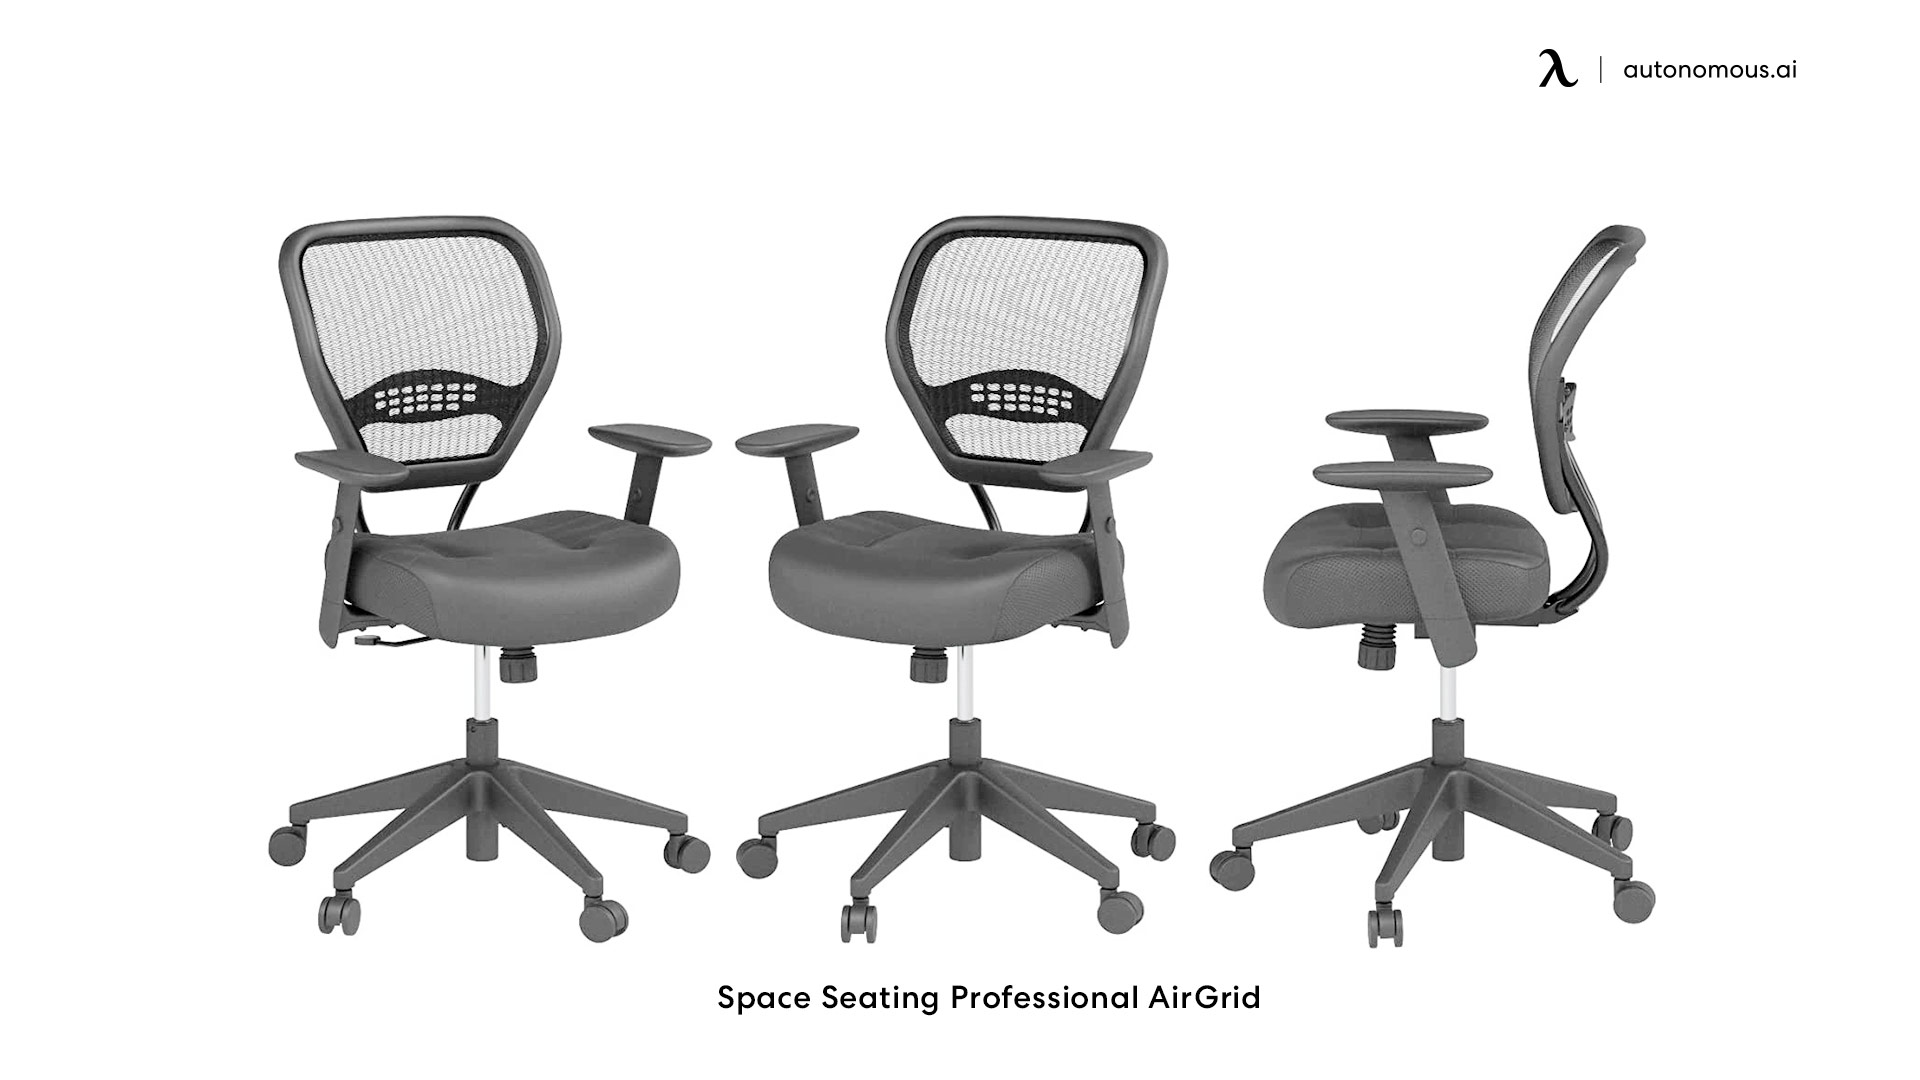 Space Seating Professional AirGrid